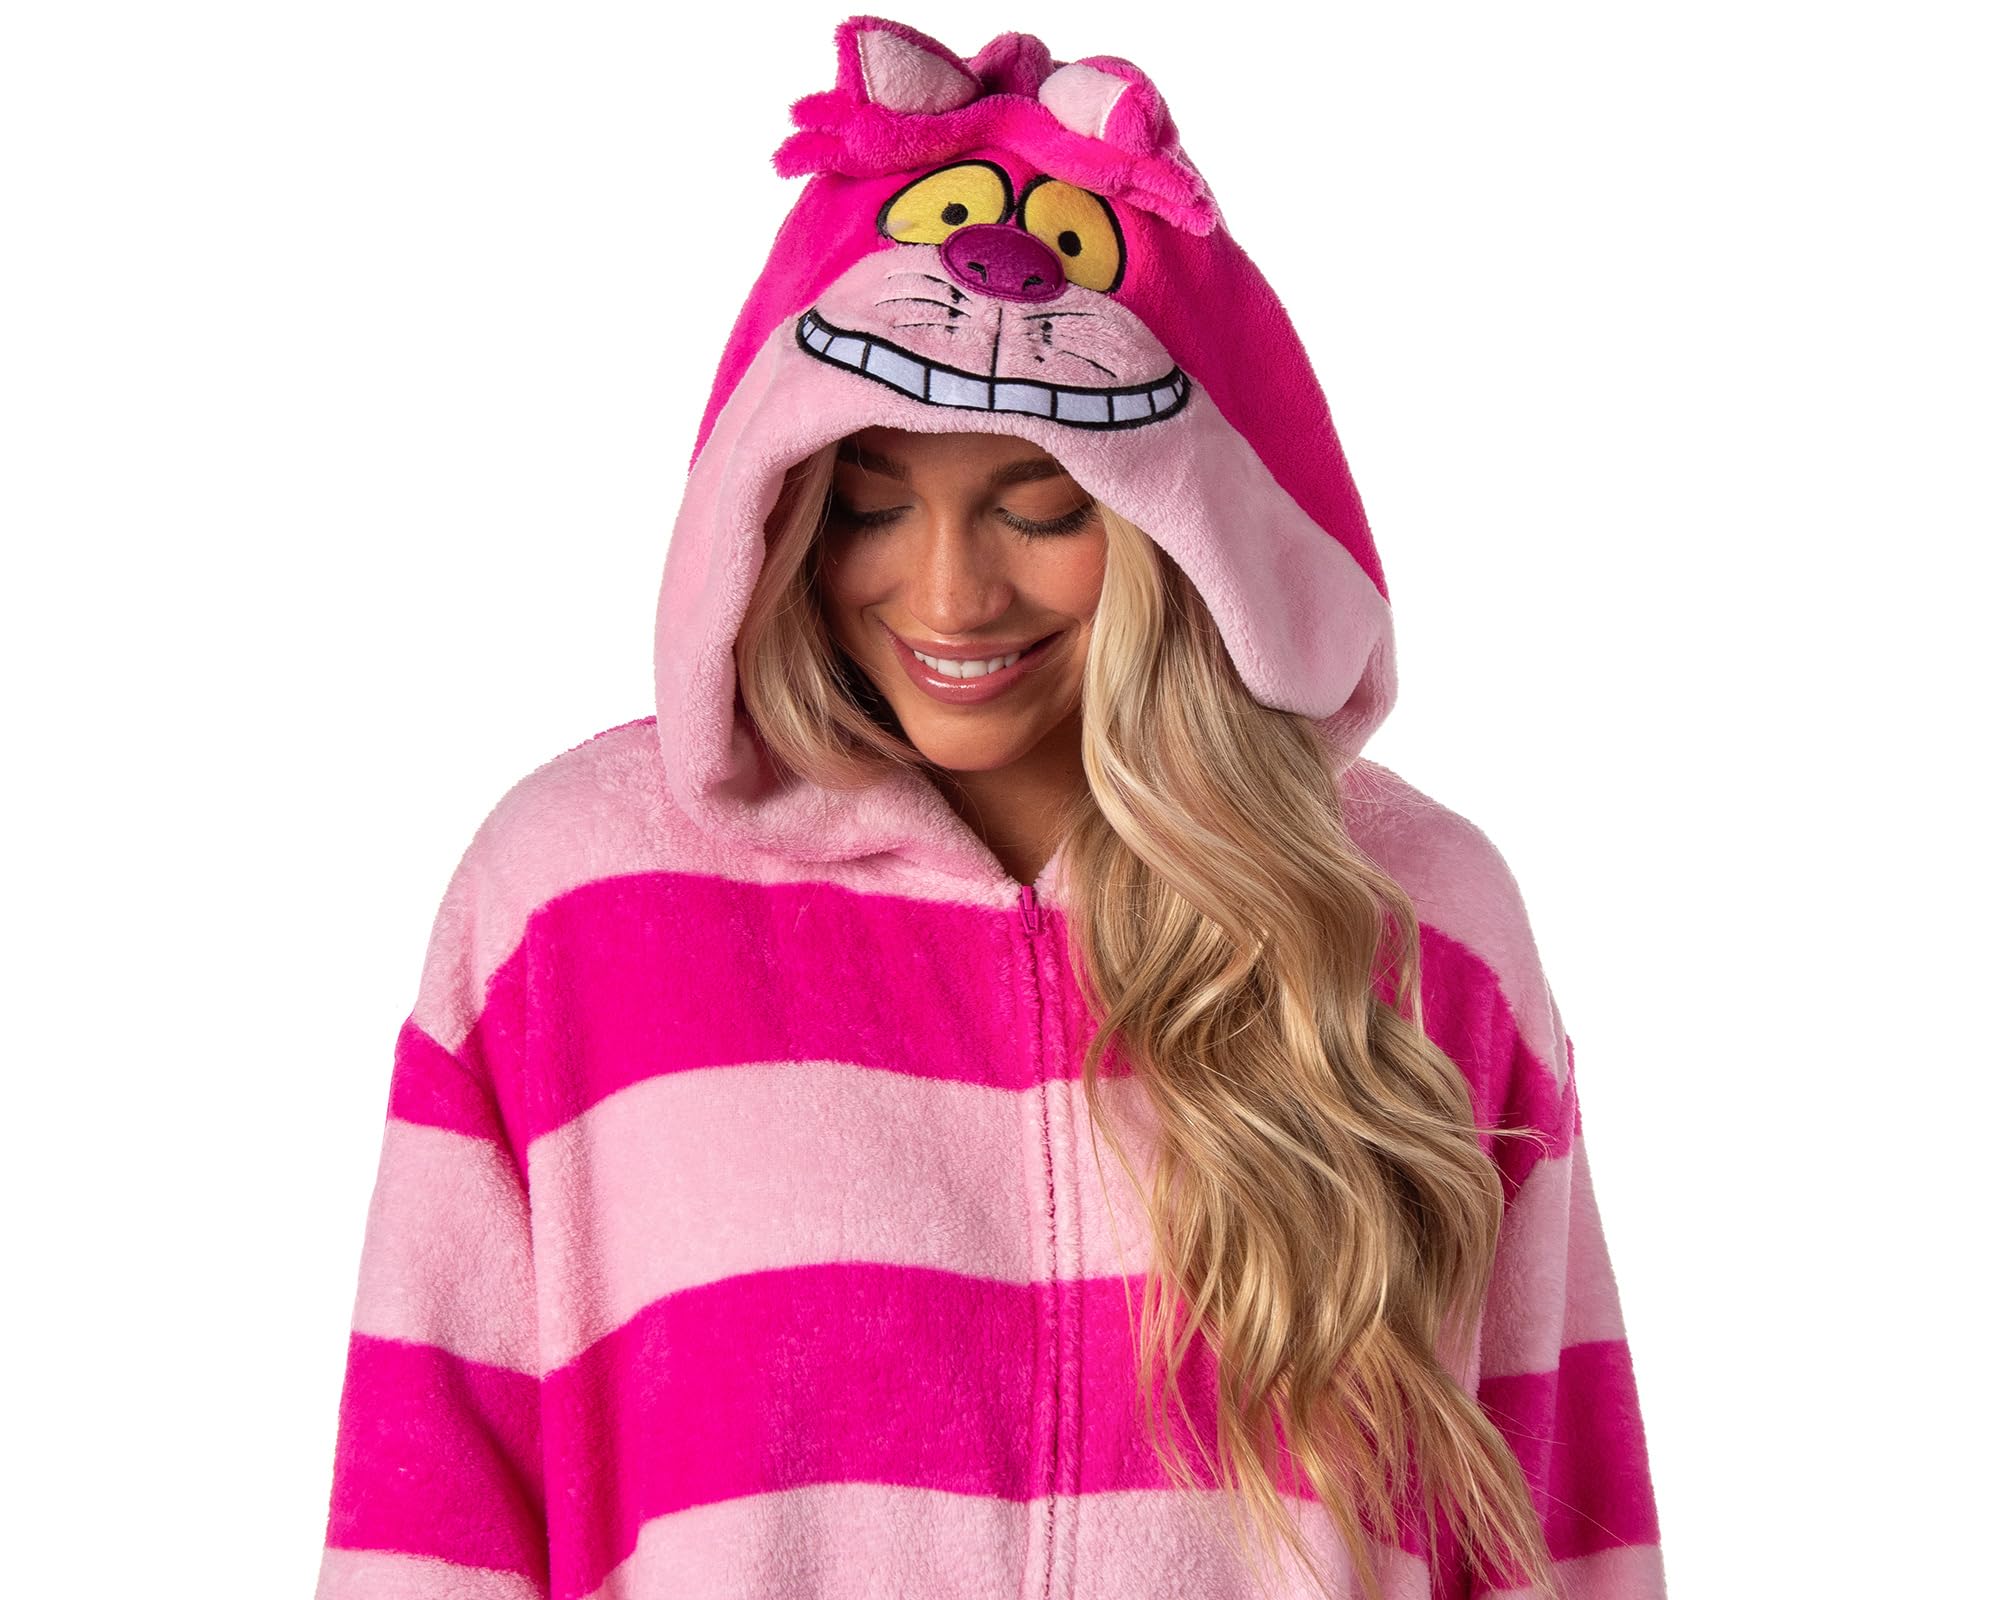 INTIMO Alice in Wonderland Cheshire Cat Unisex Costume Union Suit One Piece Pajama Outfit (Large/X-Large)